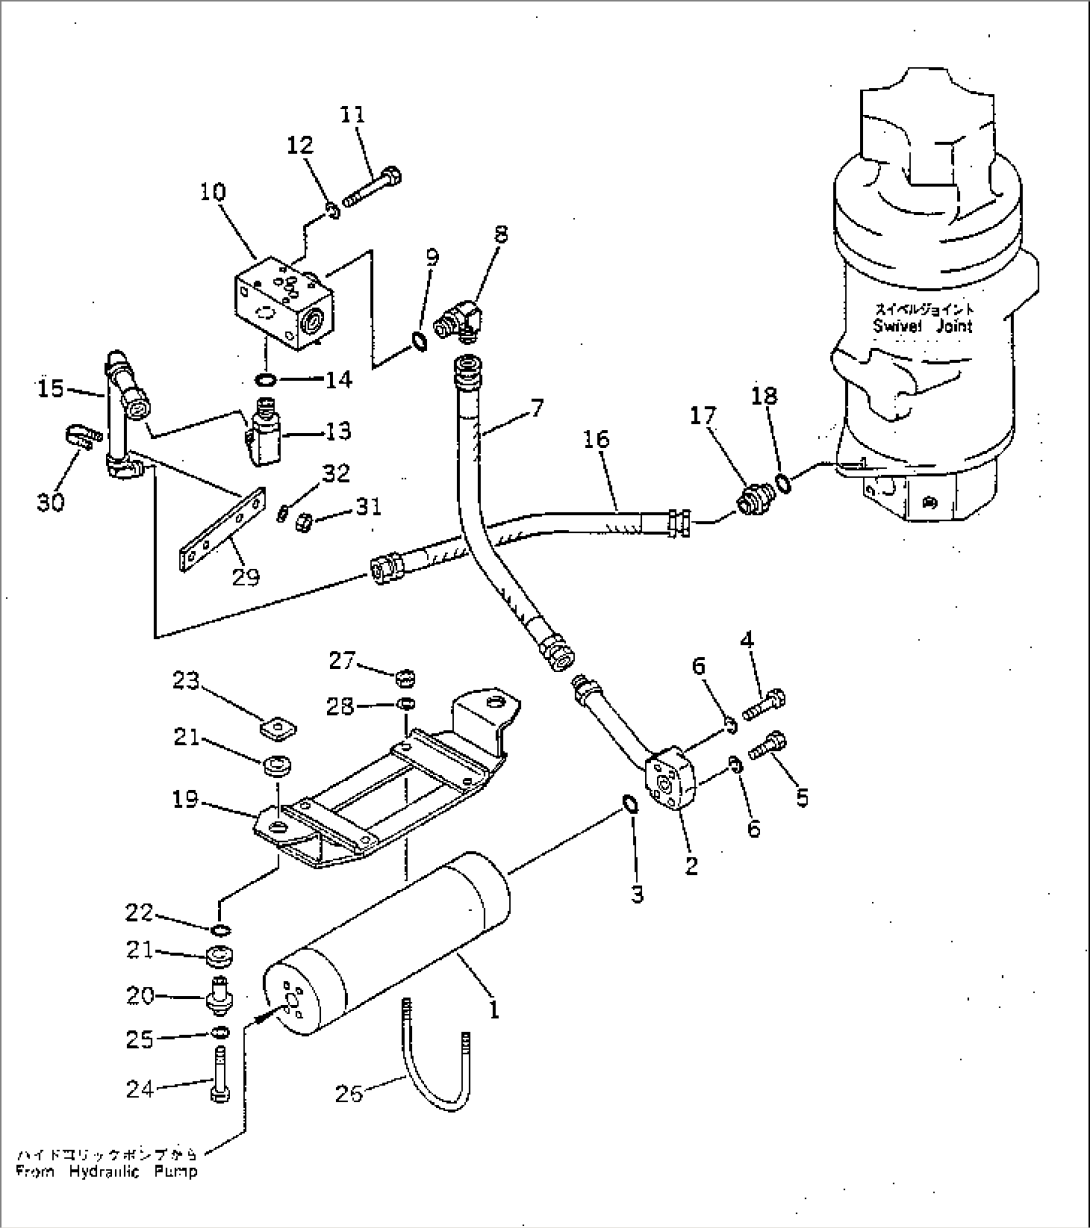 HYDRAULIC PIPING (SWING¤ STEERING PUMP TO SWIVEL JOINT) (2/2)